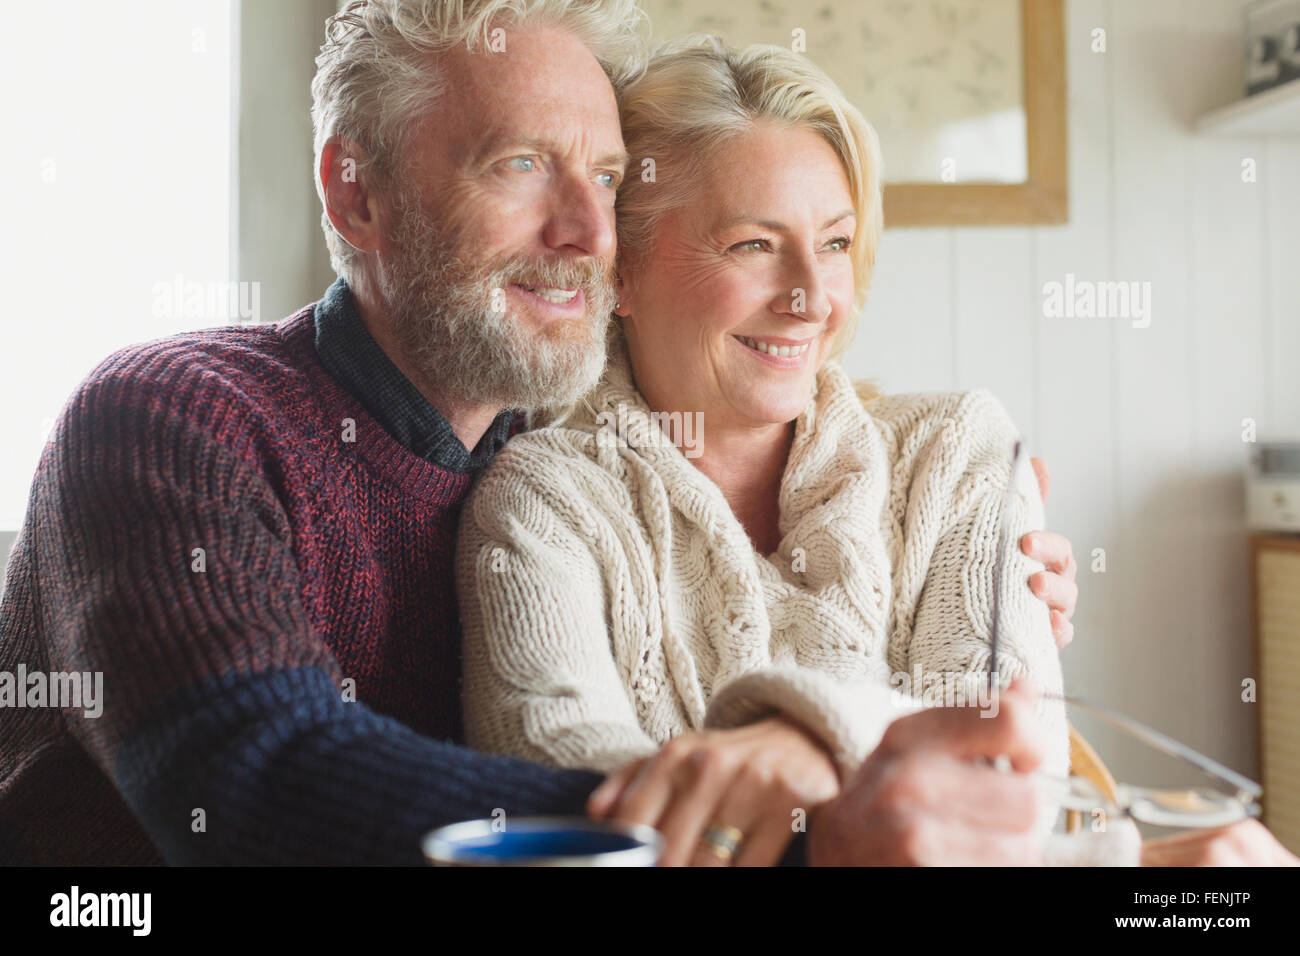 Smiling senior couple hugging and looking away Banque D'Images